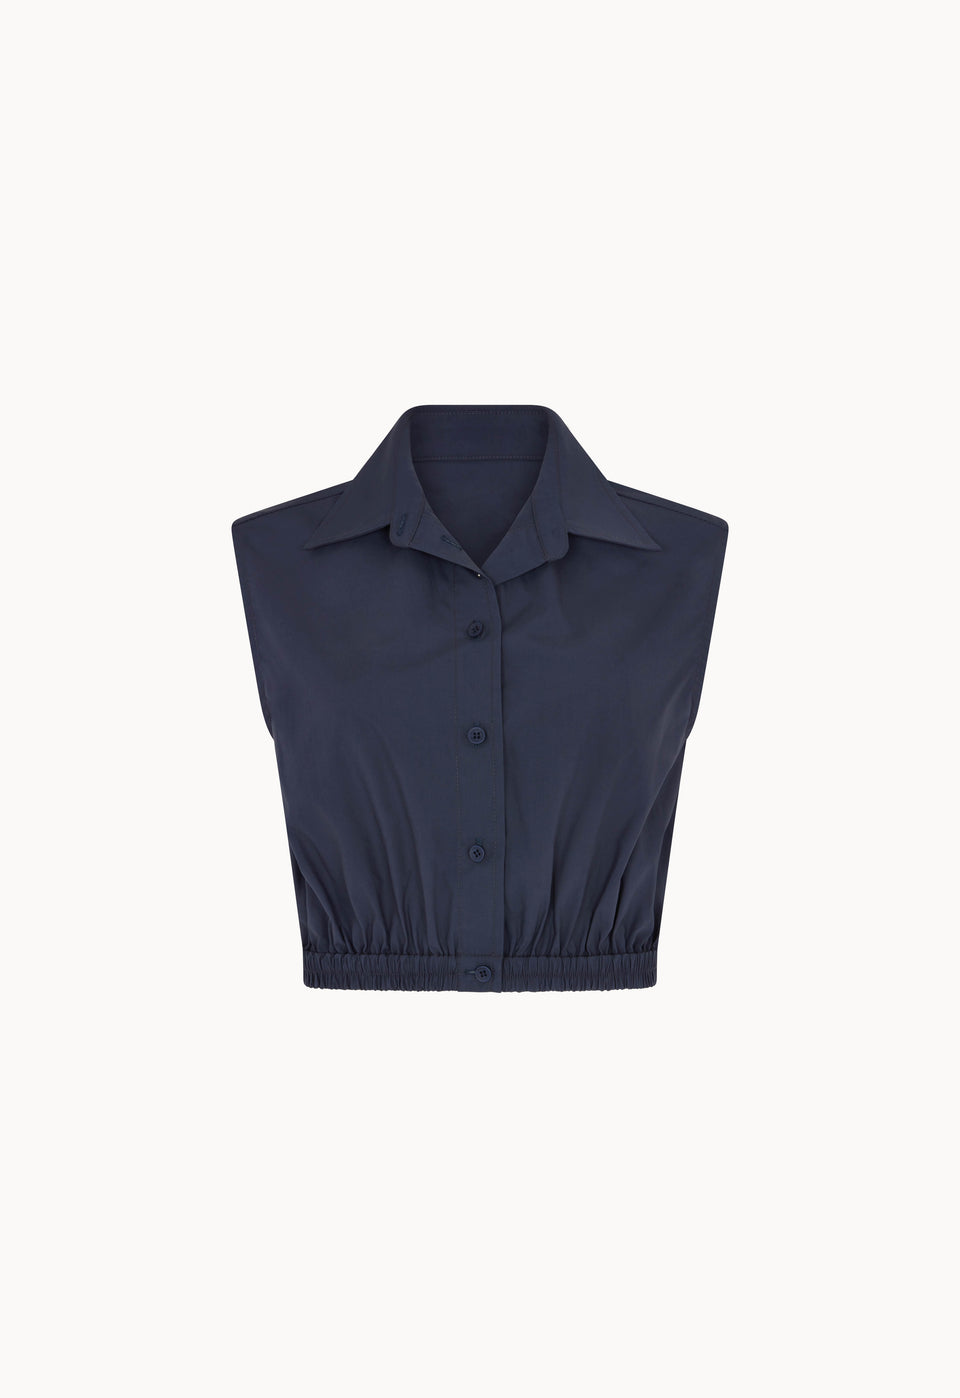 Cotton Button Up Top in Navy